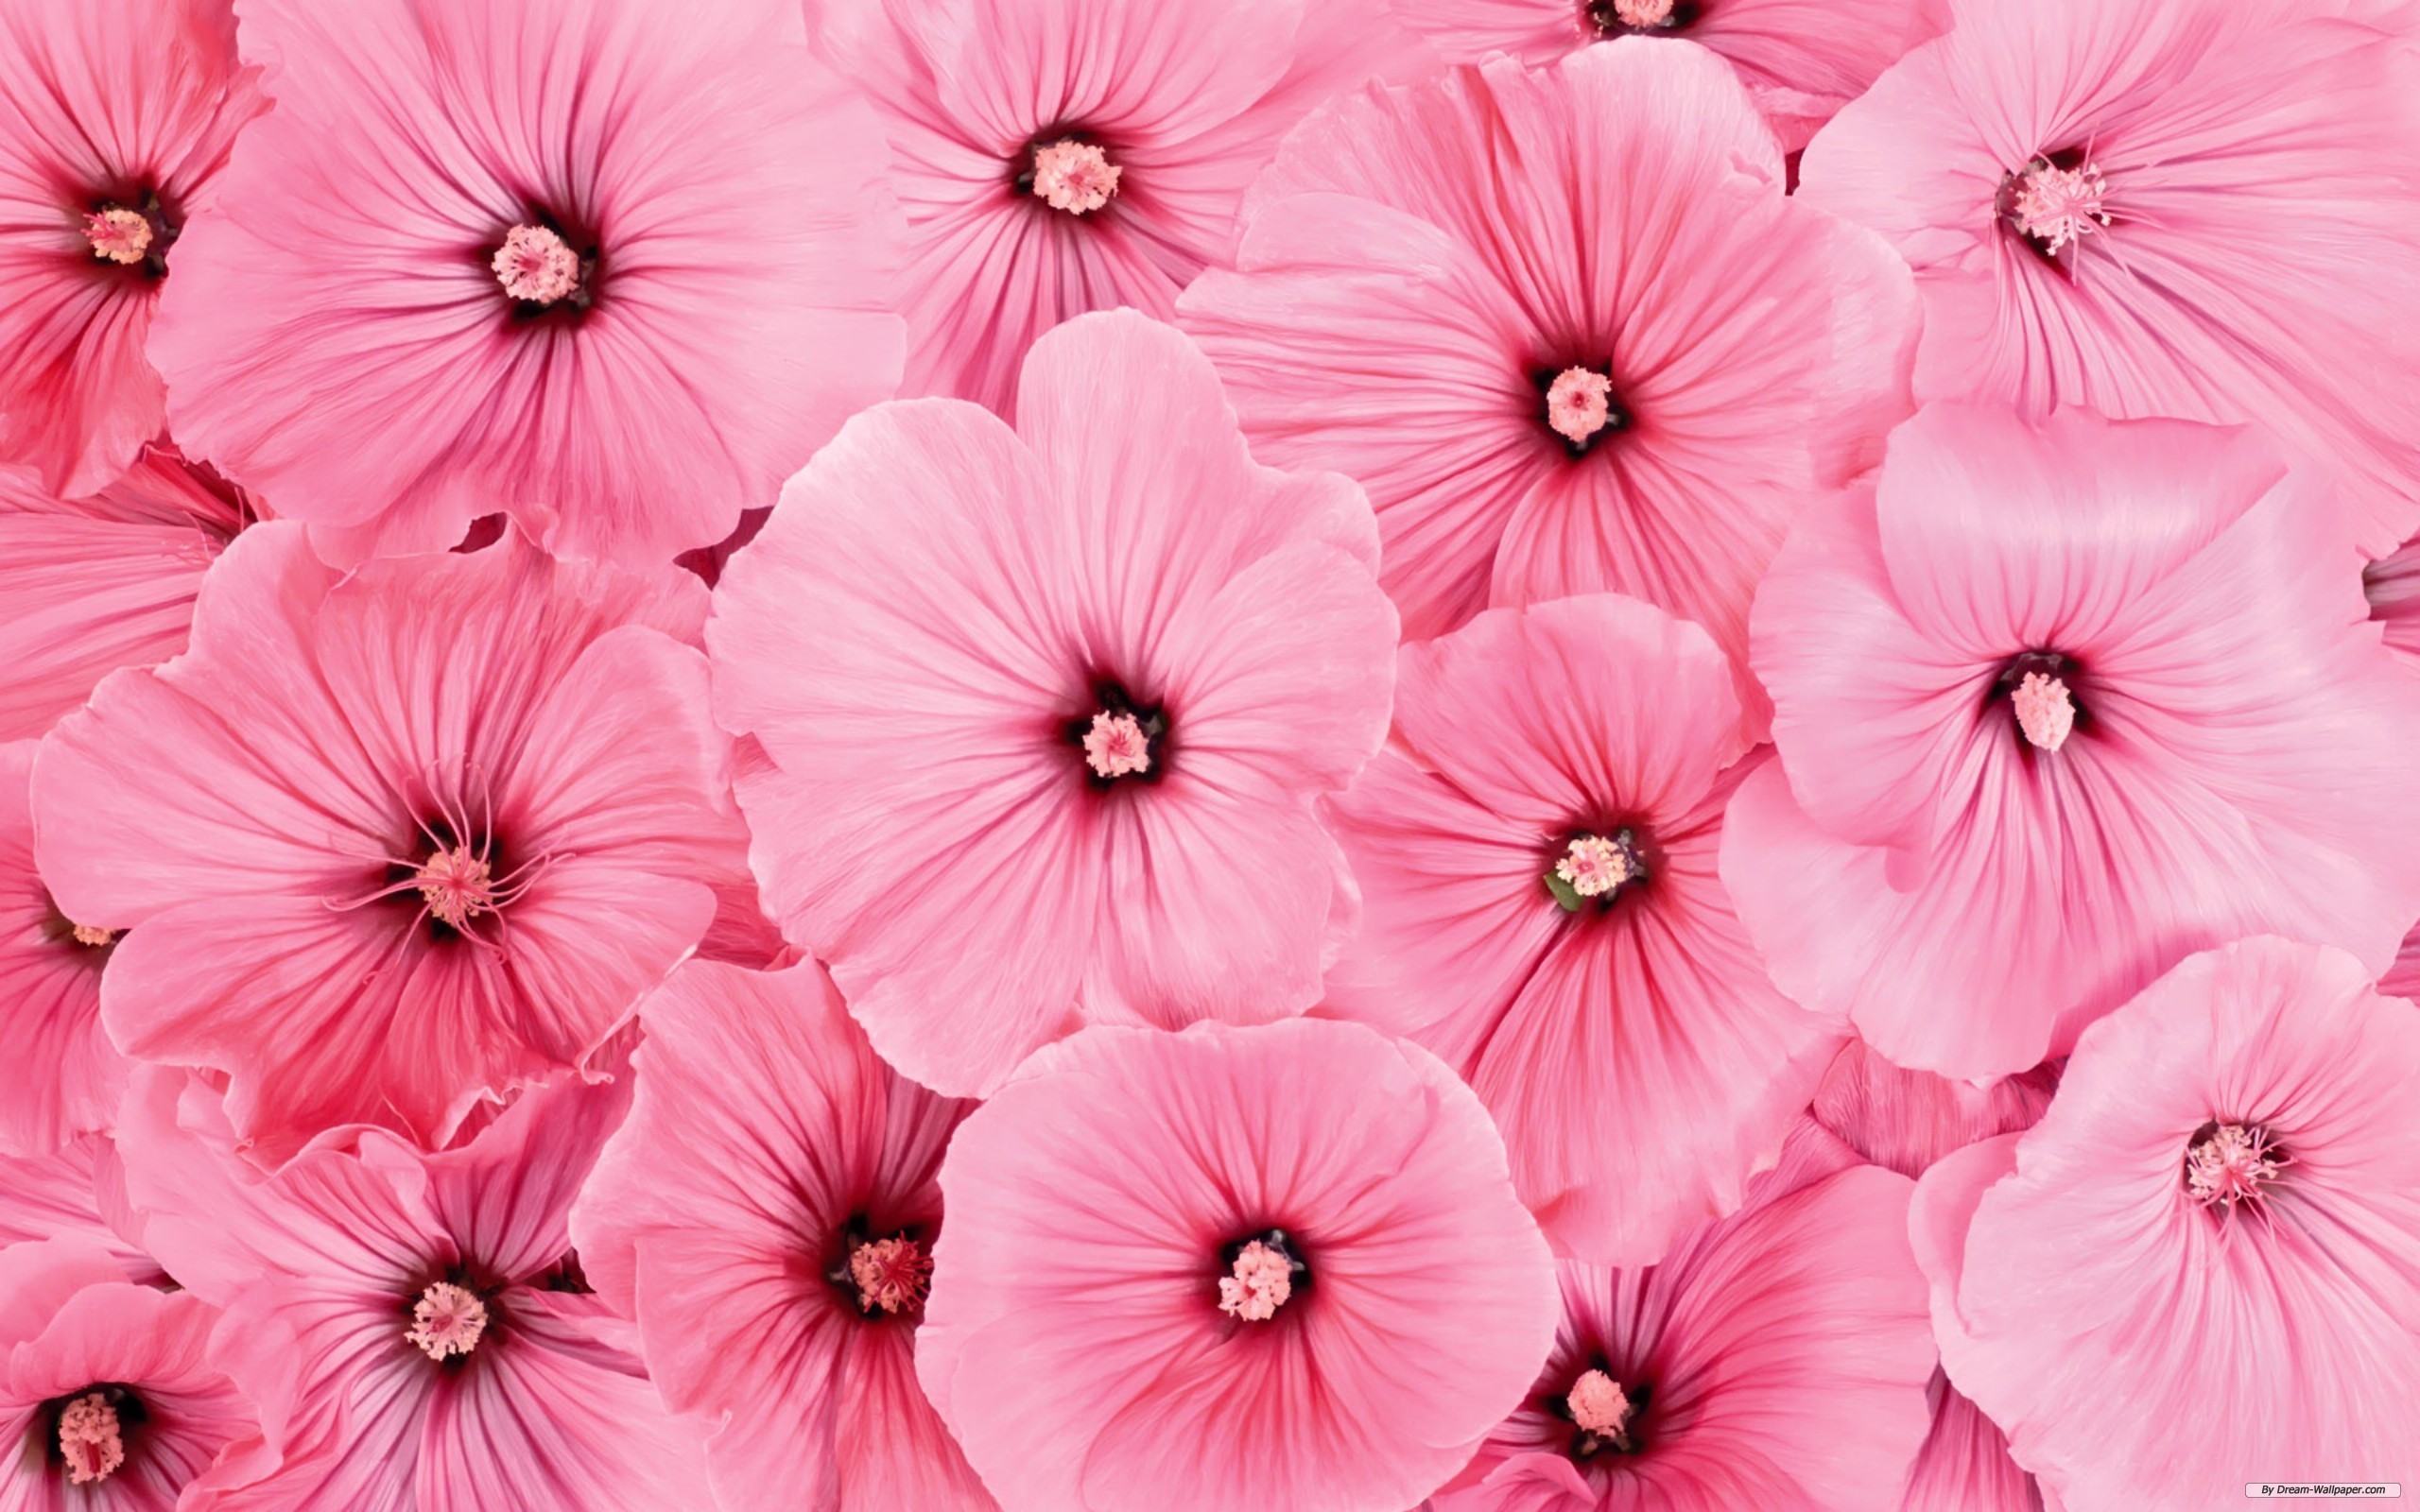 Pink Flowers Wallpaper HD Pictures One